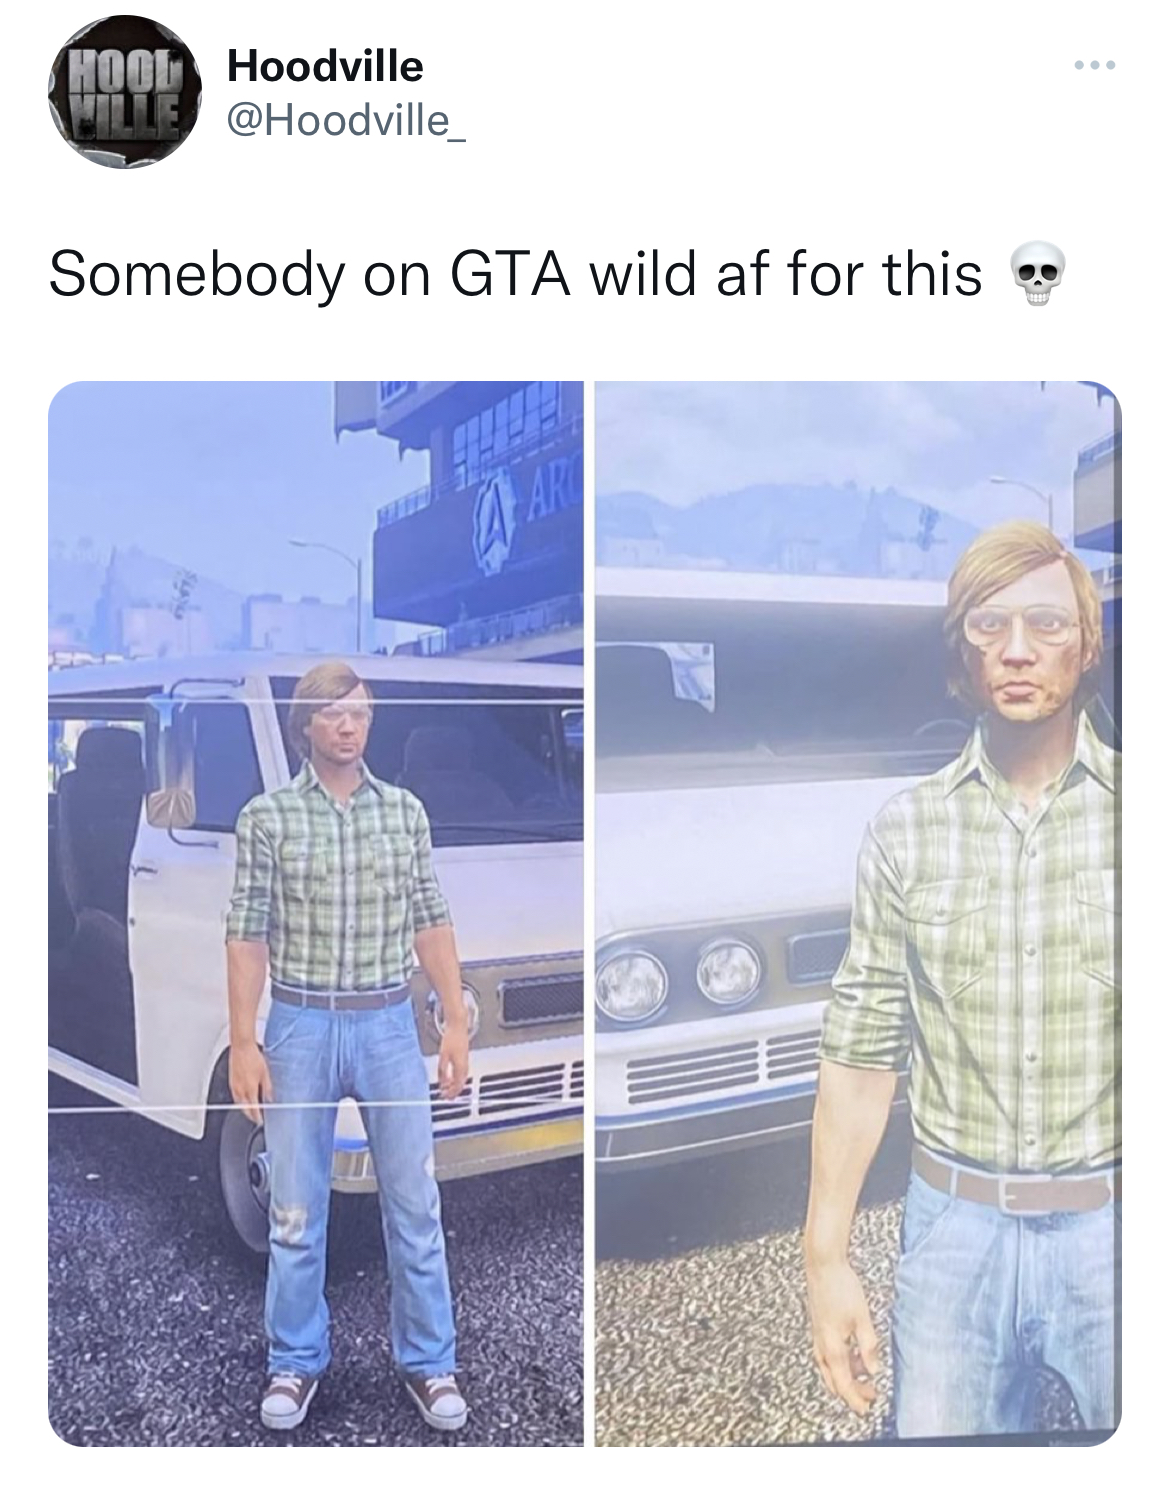 Savage and funny tweets - denim - Hool Hoodville Will Somebody on Gta wild af for this Ar www